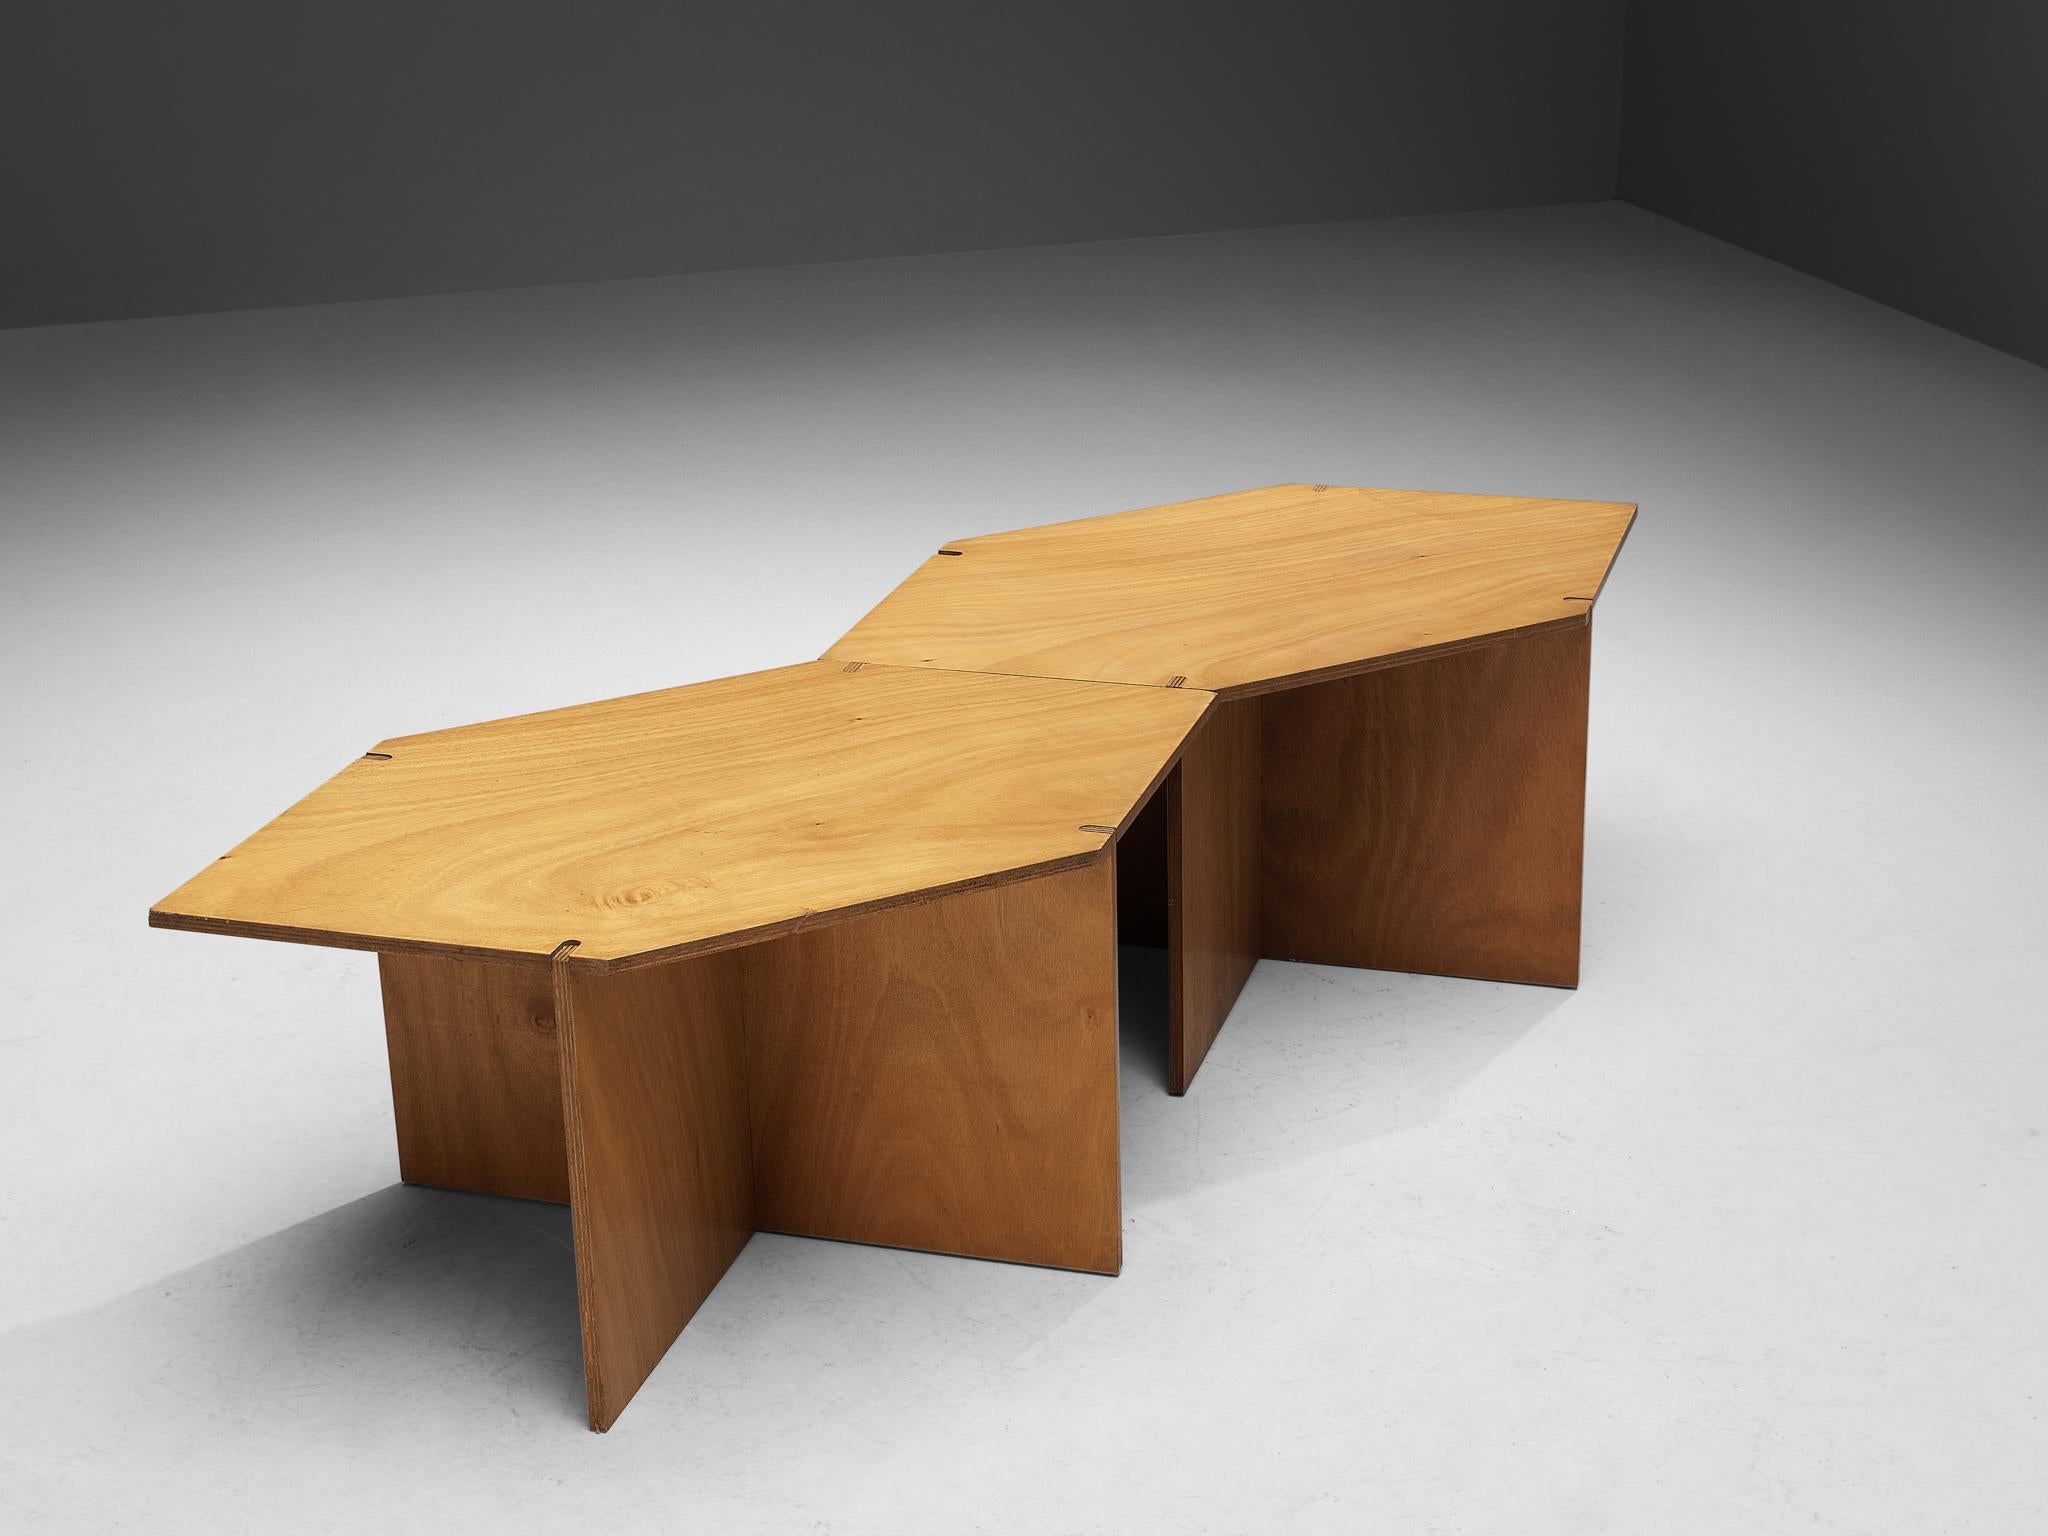 Coffee tables, walnut, Europe, 1980s

The top features a hexagonal shape with sharp angles and rests on a cruciform base. Another characteristic that enhances the table's constructive appearance are the visible wood joints. The walnut shows